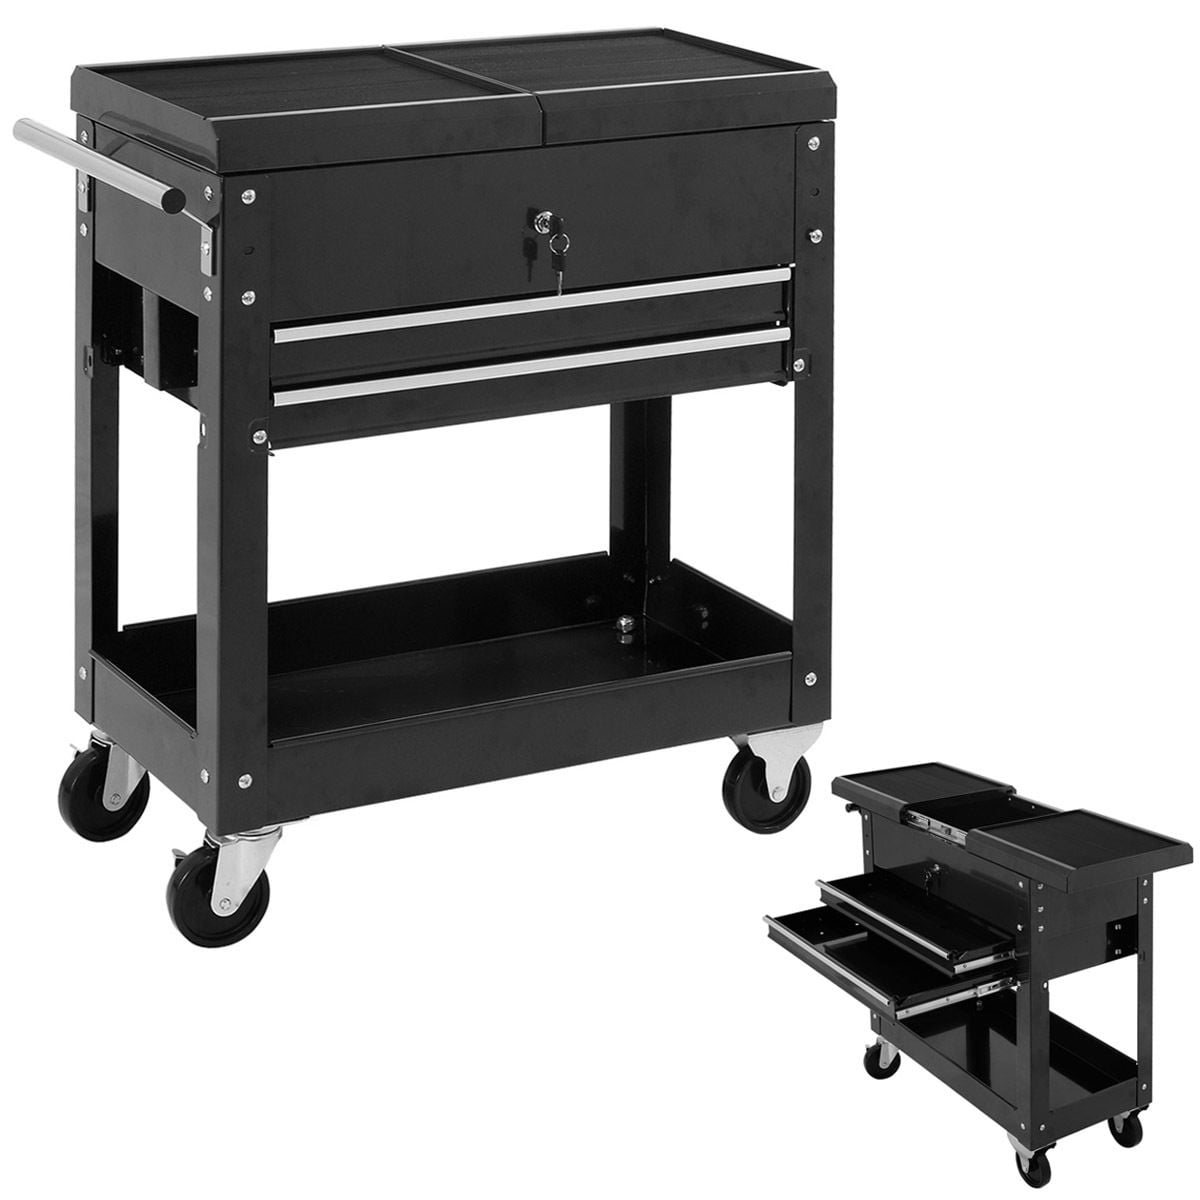 Black Goplus Service Tool Cart Tool Organizers Mobile Storage Cabinet Organizer Dollies 330 LBS Capacity 3-Tray Rolling Utility Cart Trolley with Drawer Industrial Commercial Service Cart